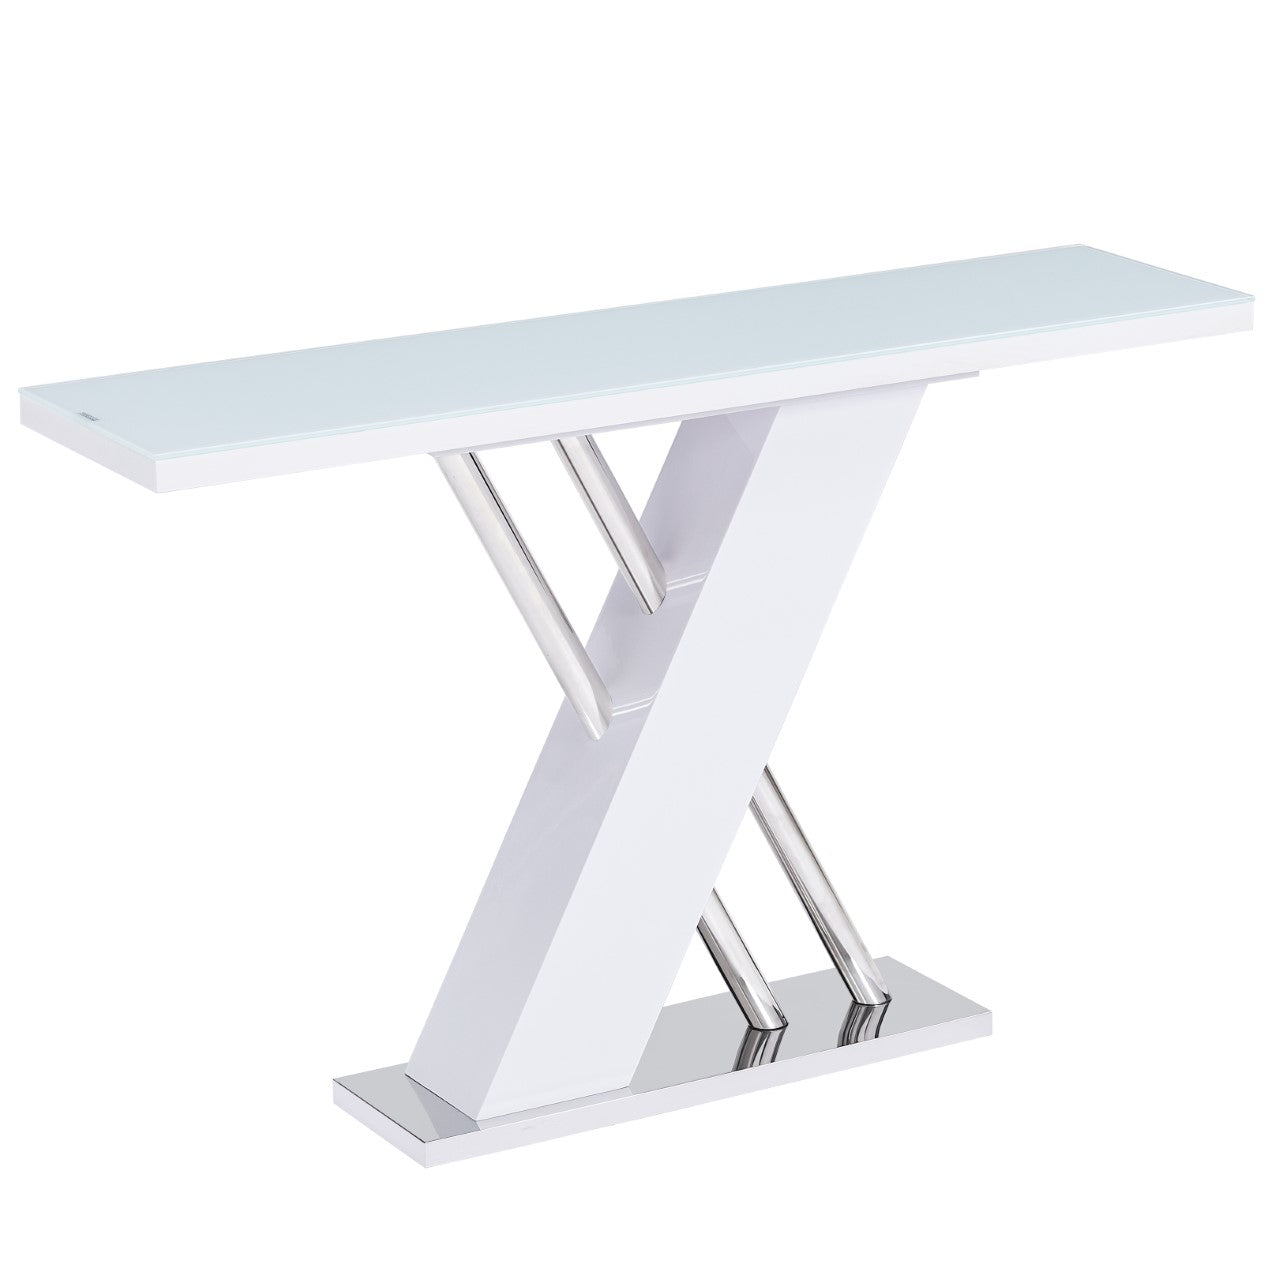 CO-KL05 Console Table